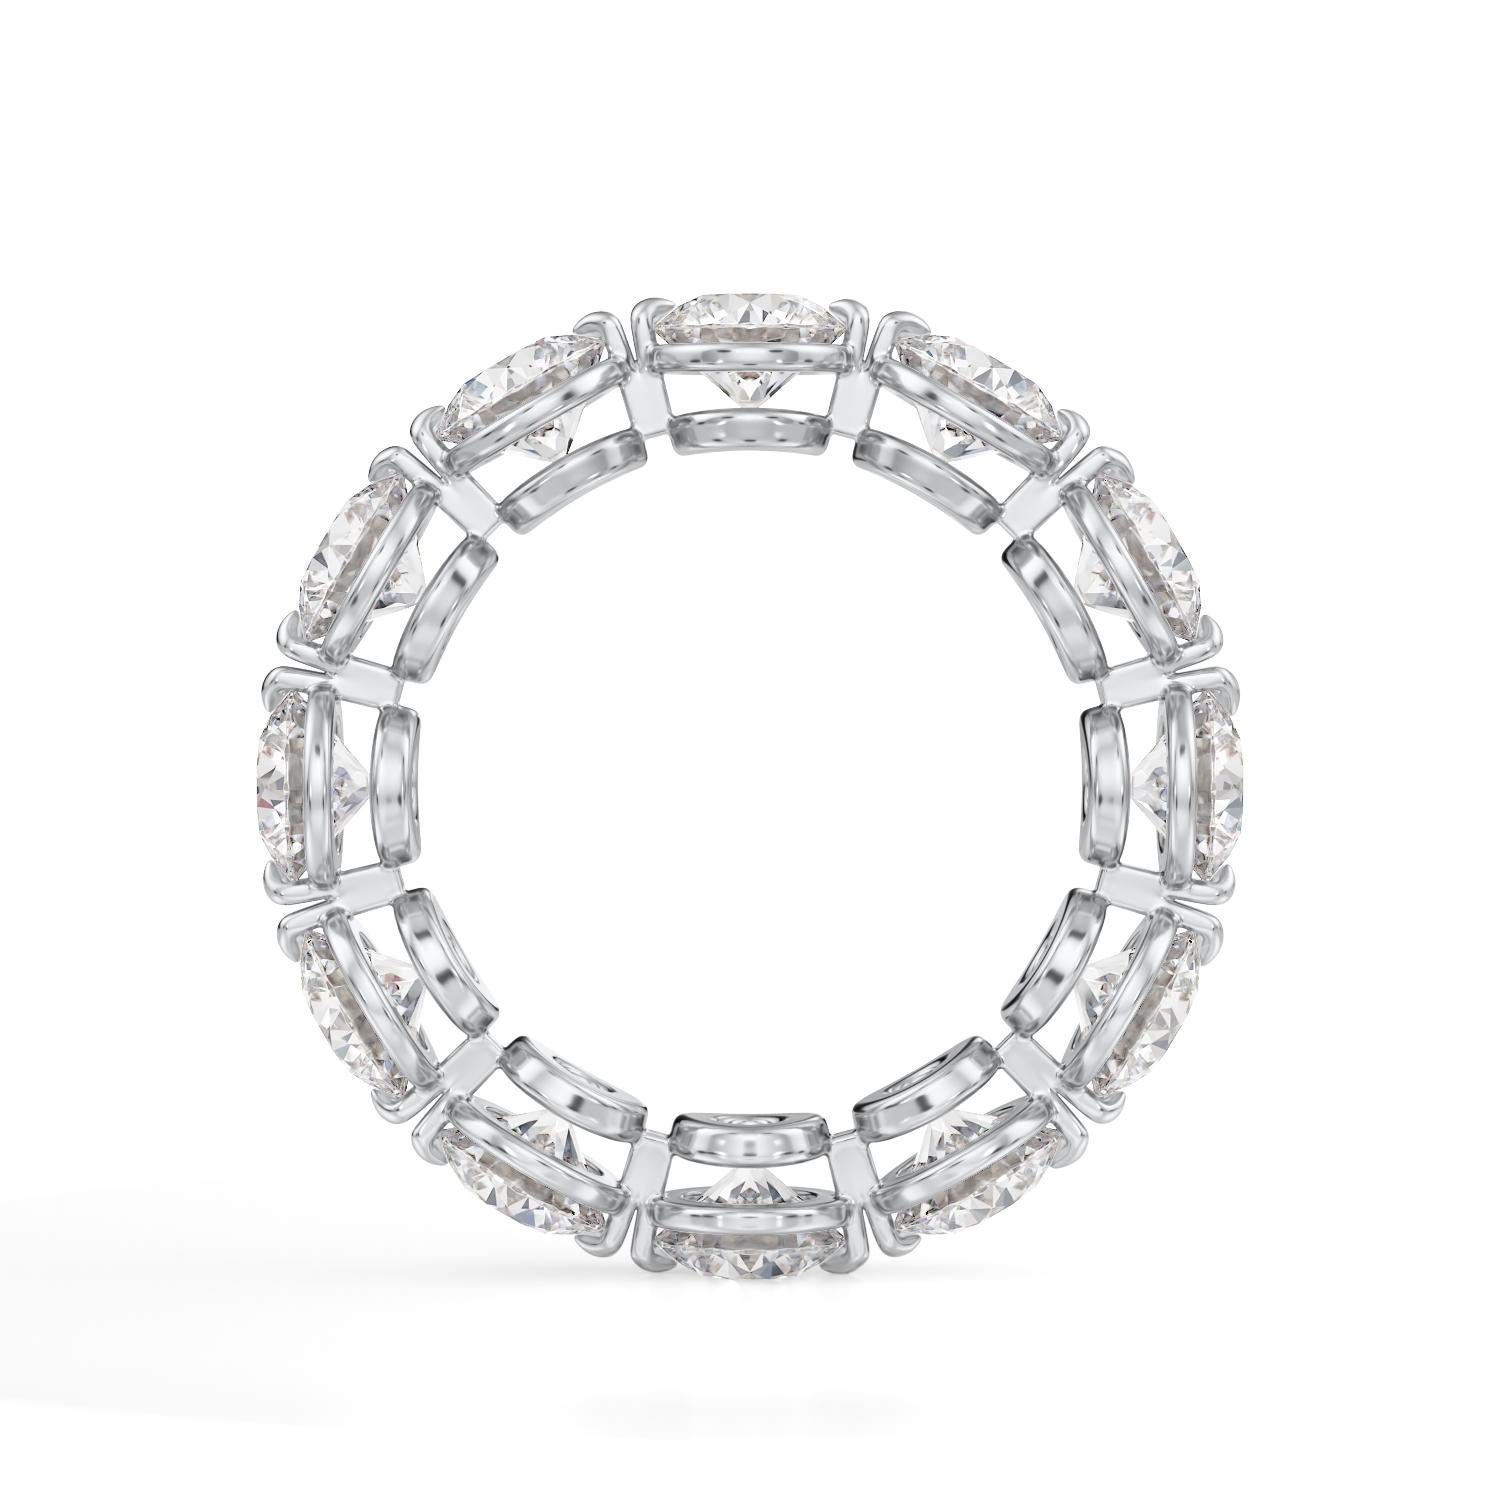 Diamond Eternity Band set in Platinum. 12 Round Brilliant diamonds are E-F VS1-SI1. Carat weight: 4ct. Total ring weight 5.2grams. Ring size: 5. Can be sized upon request. This ring is customizable, price may vary depending on modifications such as,